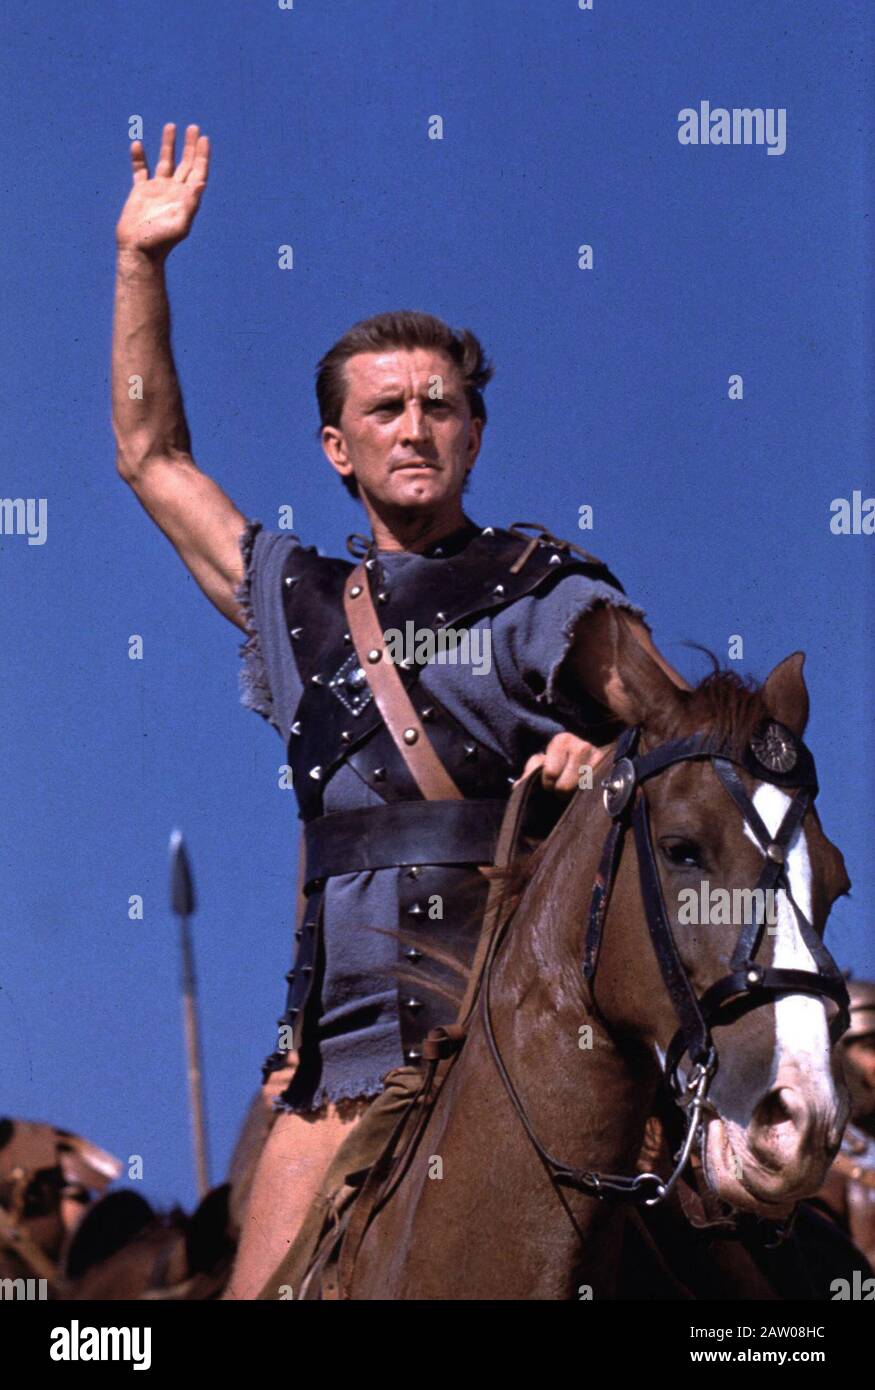 February 5, 2020: KIRK DOUGLAS (born Issur Danielovitch, December 9, 1916 - February 5, 2020) actor, producer, director author, and an icon of Hollywood's Golden Age, has died at 103. PICTURED: KIRK DOUGLAS in a scene from the 1960 film 'Spartacus'. (Credit Image: © Globe Photos/ZUMAPRESS.com) Stock Photo